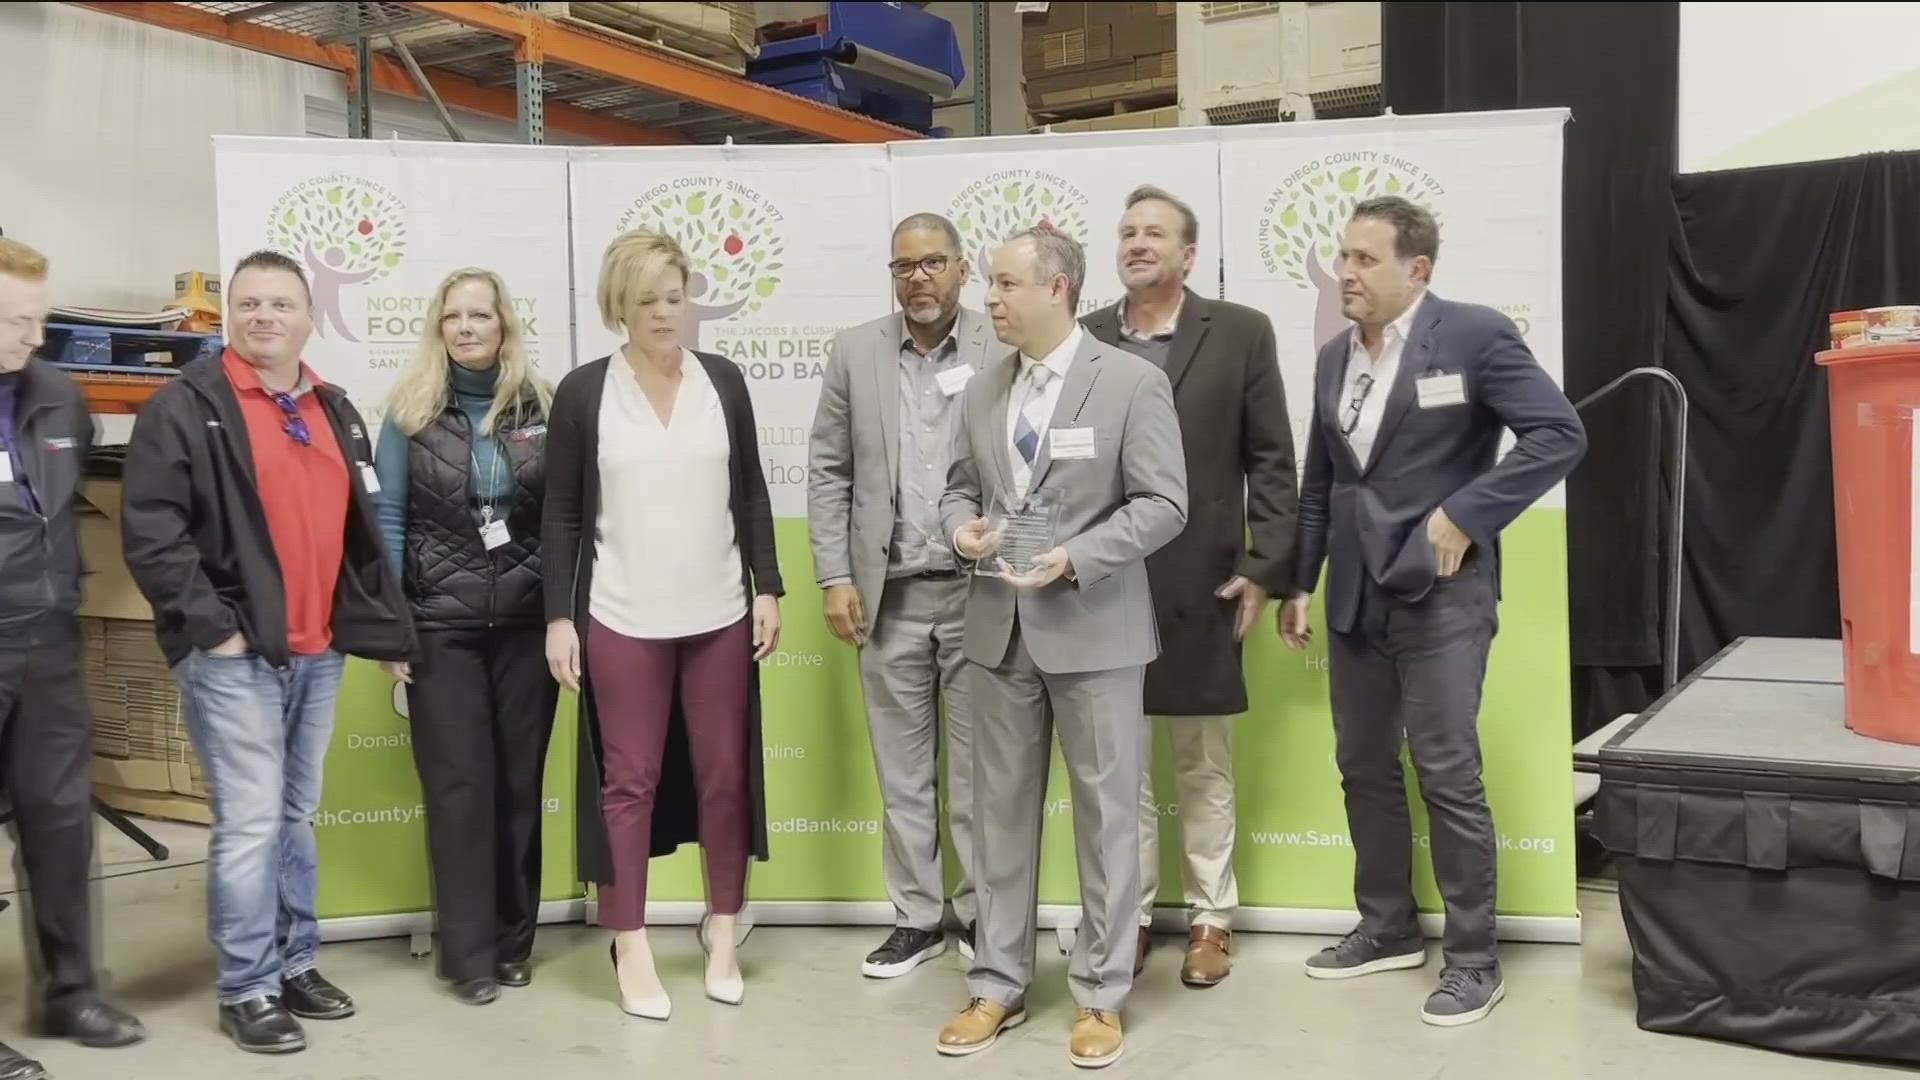 CBS 8 has been honored with the “Summer Food Drive” Award from the San Diego Food Bank.